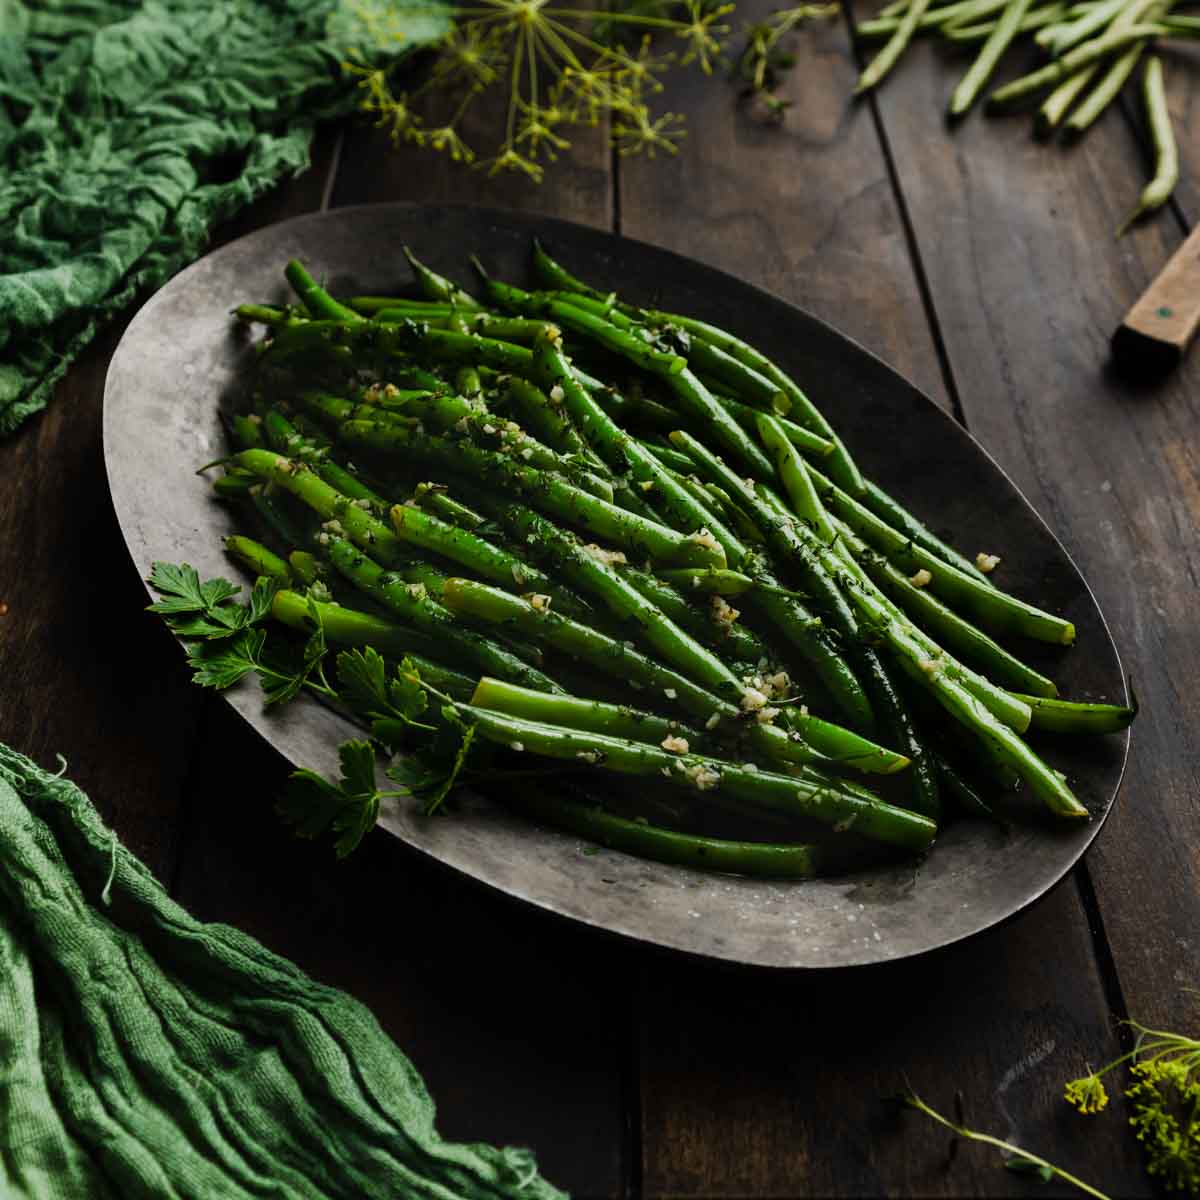 A platter of French Green Beans in Garlic Herb Butter